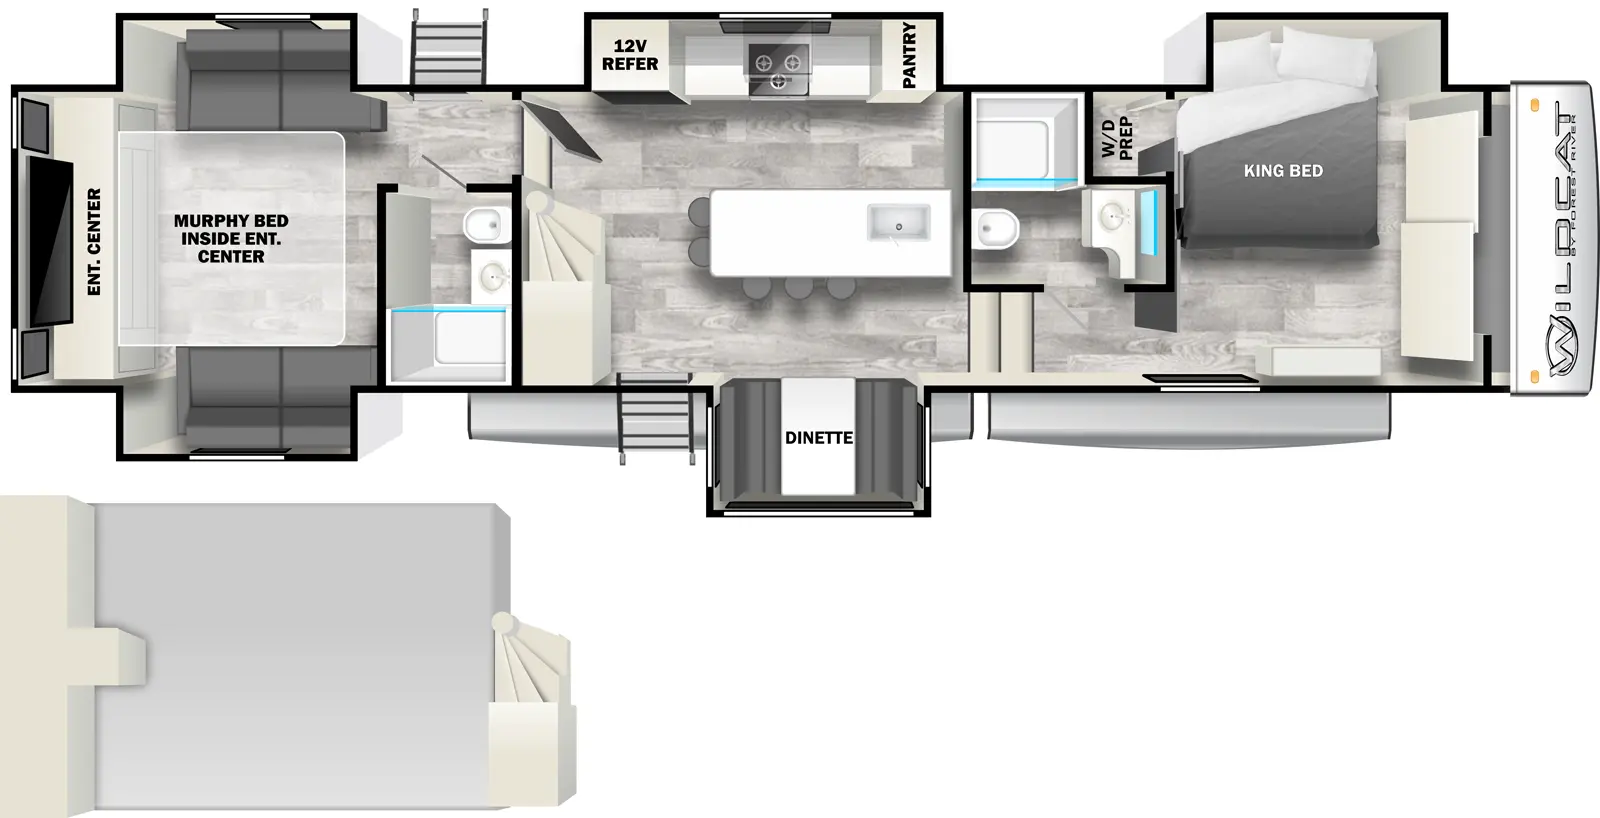 The 38BET has five slideouts and two entries. Interior layout front to back: off-door side king bed slideout, and closet with washer/dryer prep; off-door side full bathroom; steps down to main living area; mid kitchen counter with sink, and 4 barstools; off-door side slideout with pantry, cooktop, and 12V refrigerator; door side slideout with l-shape dinette, and entry; stairs to loft area; steps up to rear with door side full bathroom, off-door side second entry; opposing slideouts with seating, and rear entertainment center with murphy bed inside.